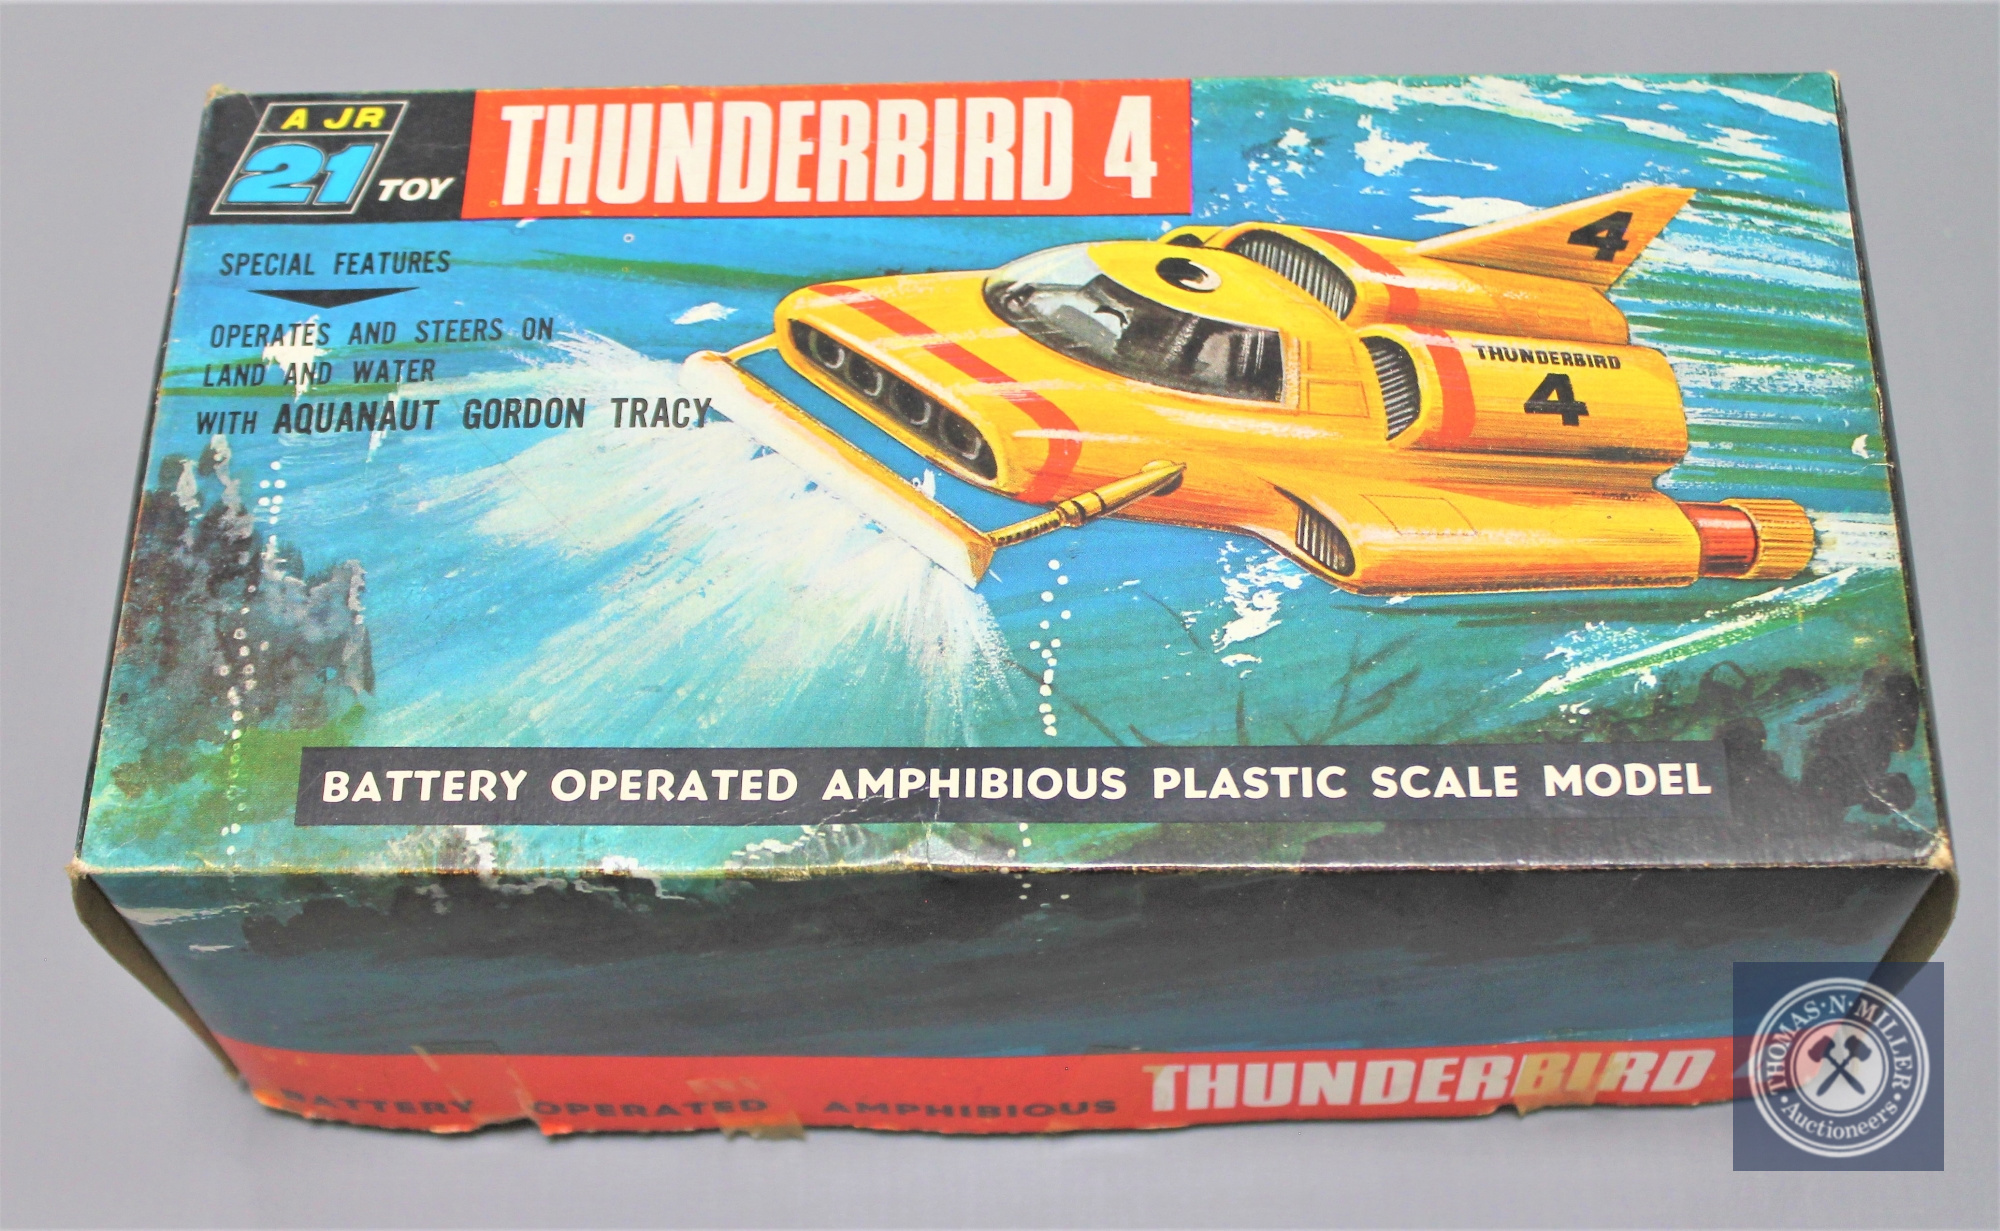 A J Rosenthal (Toys) Limited 21 Toy Thunderbird 4, battery operated amphibious plastic scale model,